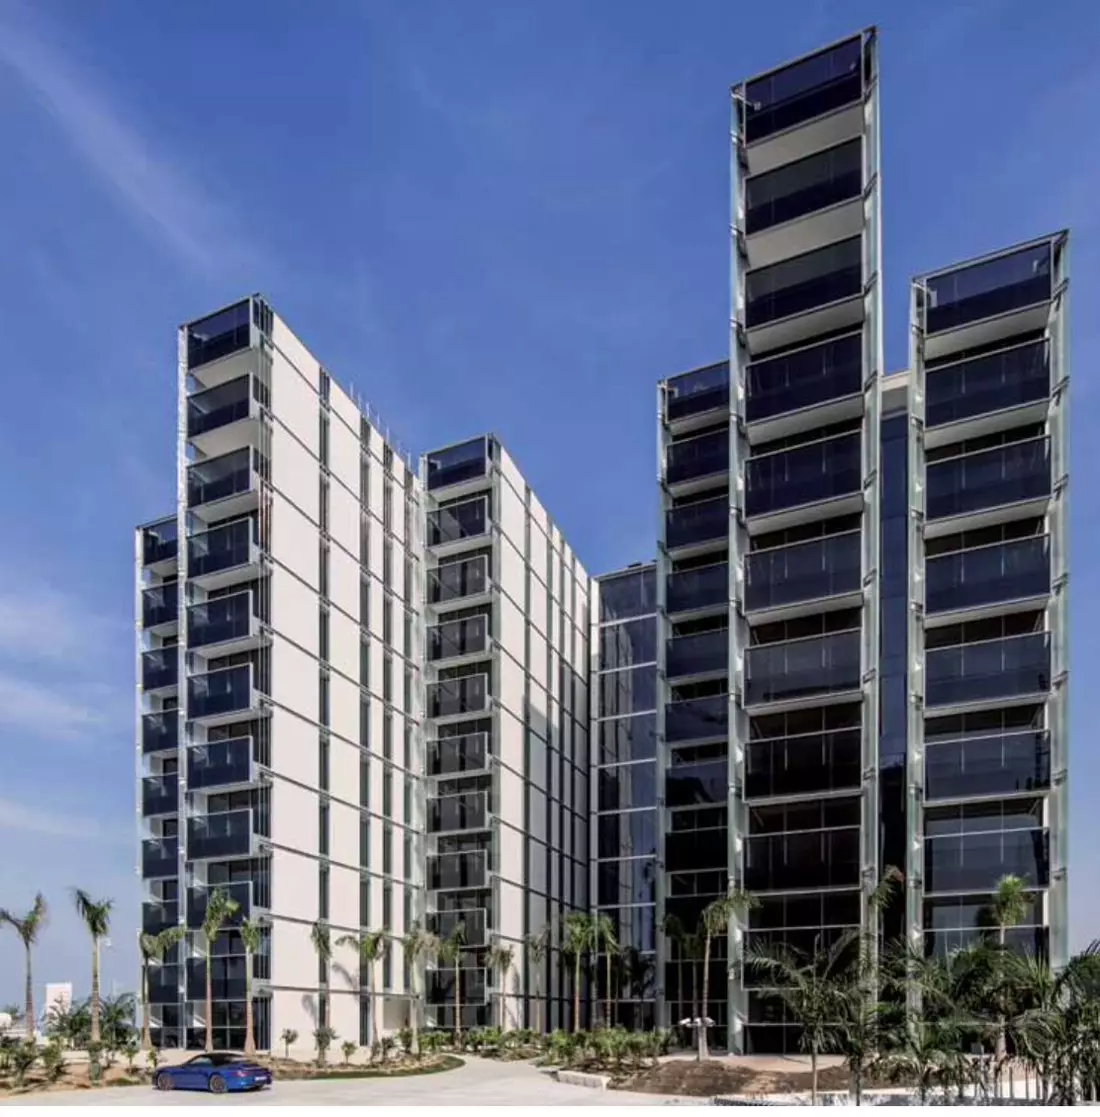 Muraba Residences is an architectural gem, designed by RCR Architects in Dubai